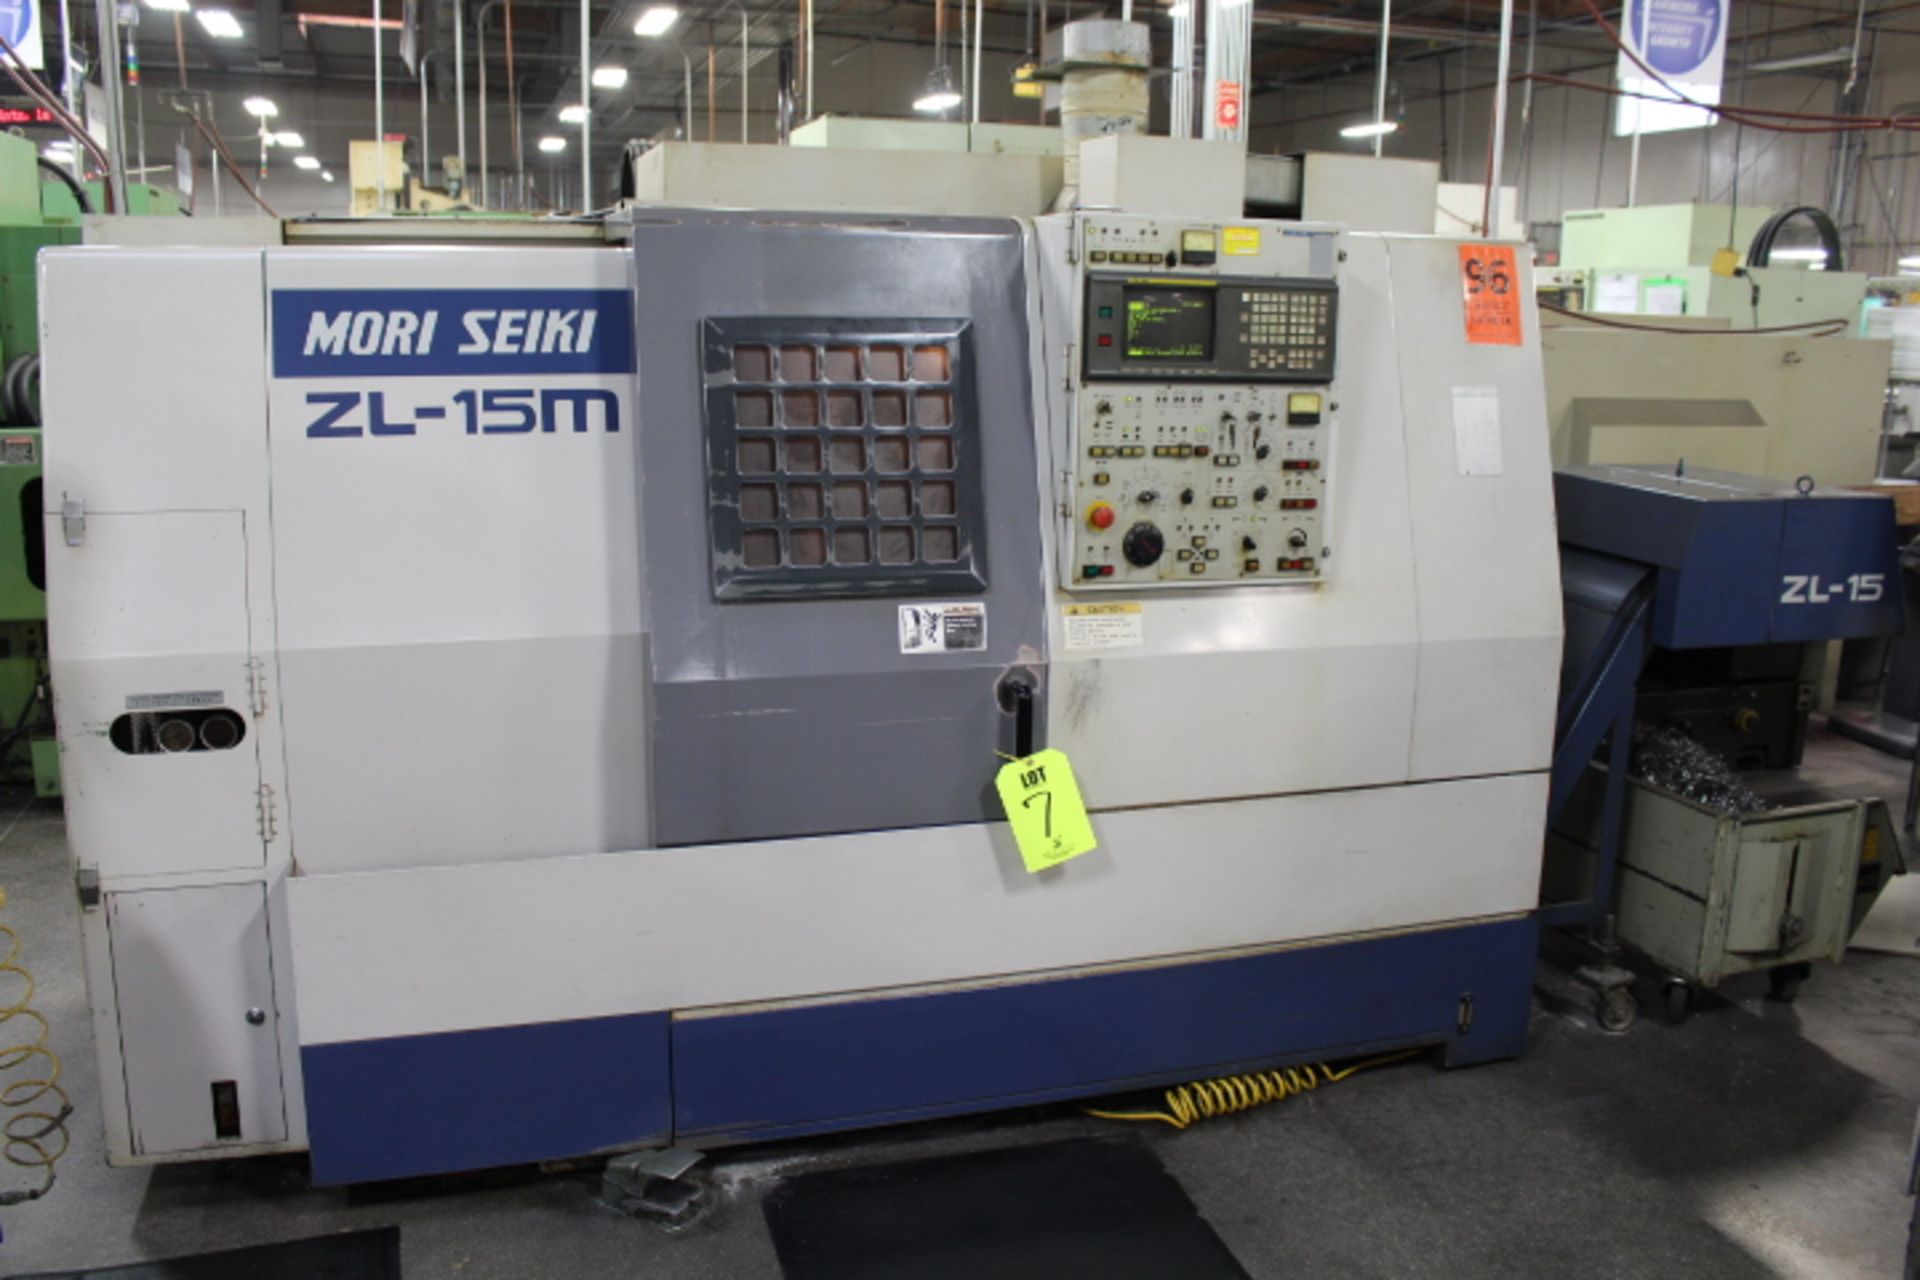 MORI SEIKI ZL-15 MC CNC TURNING CENTER, MF-D6 CNC CONTROL, C AXIS SPINDLE, MILLING / DRILLING